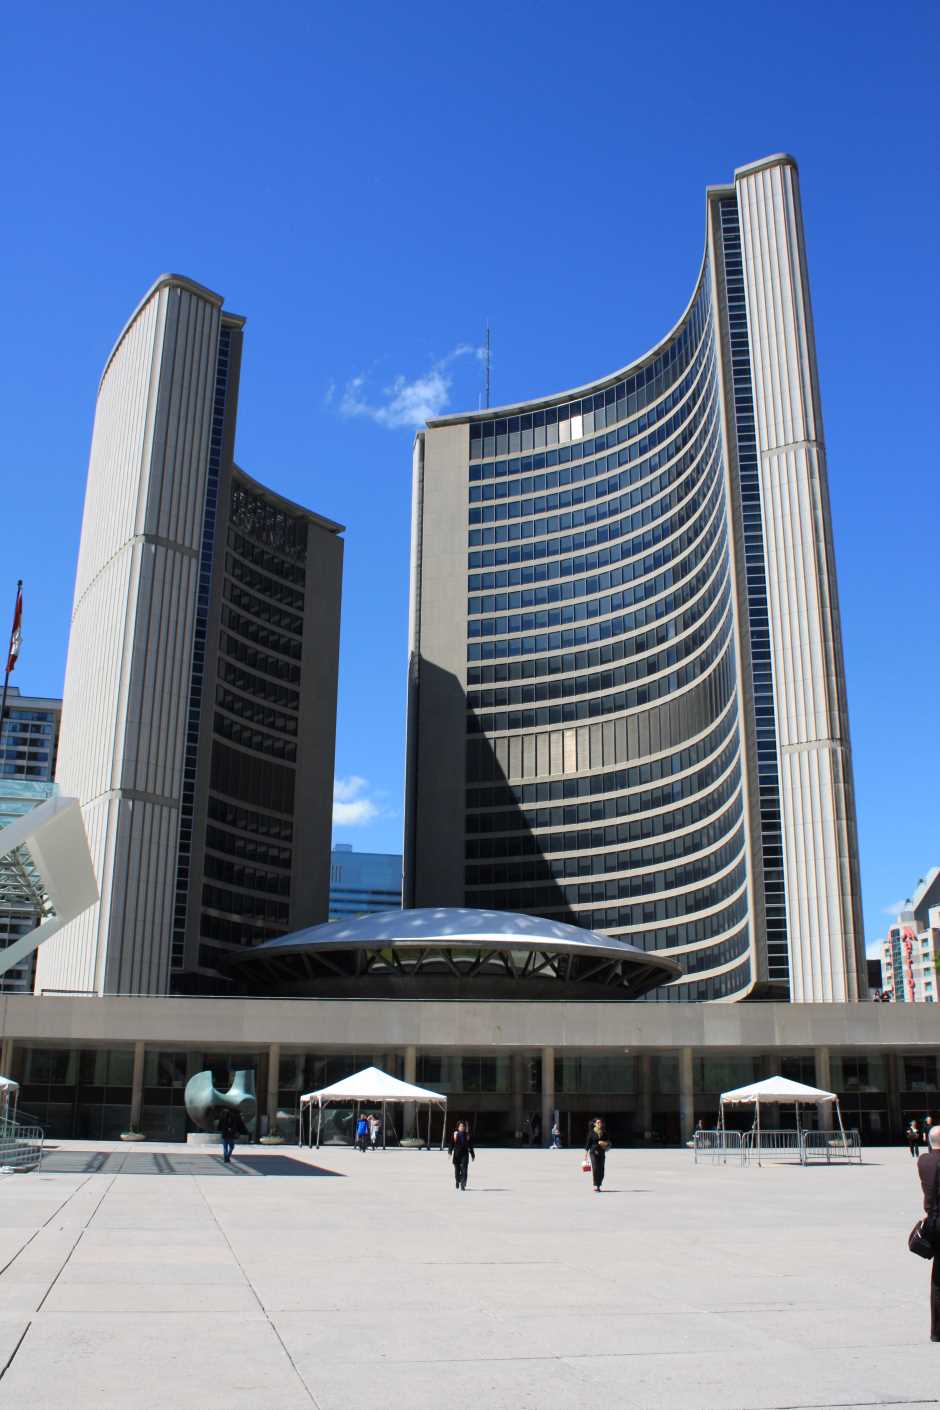 How To See Toronto Attractions On The Cheap - The City Hall